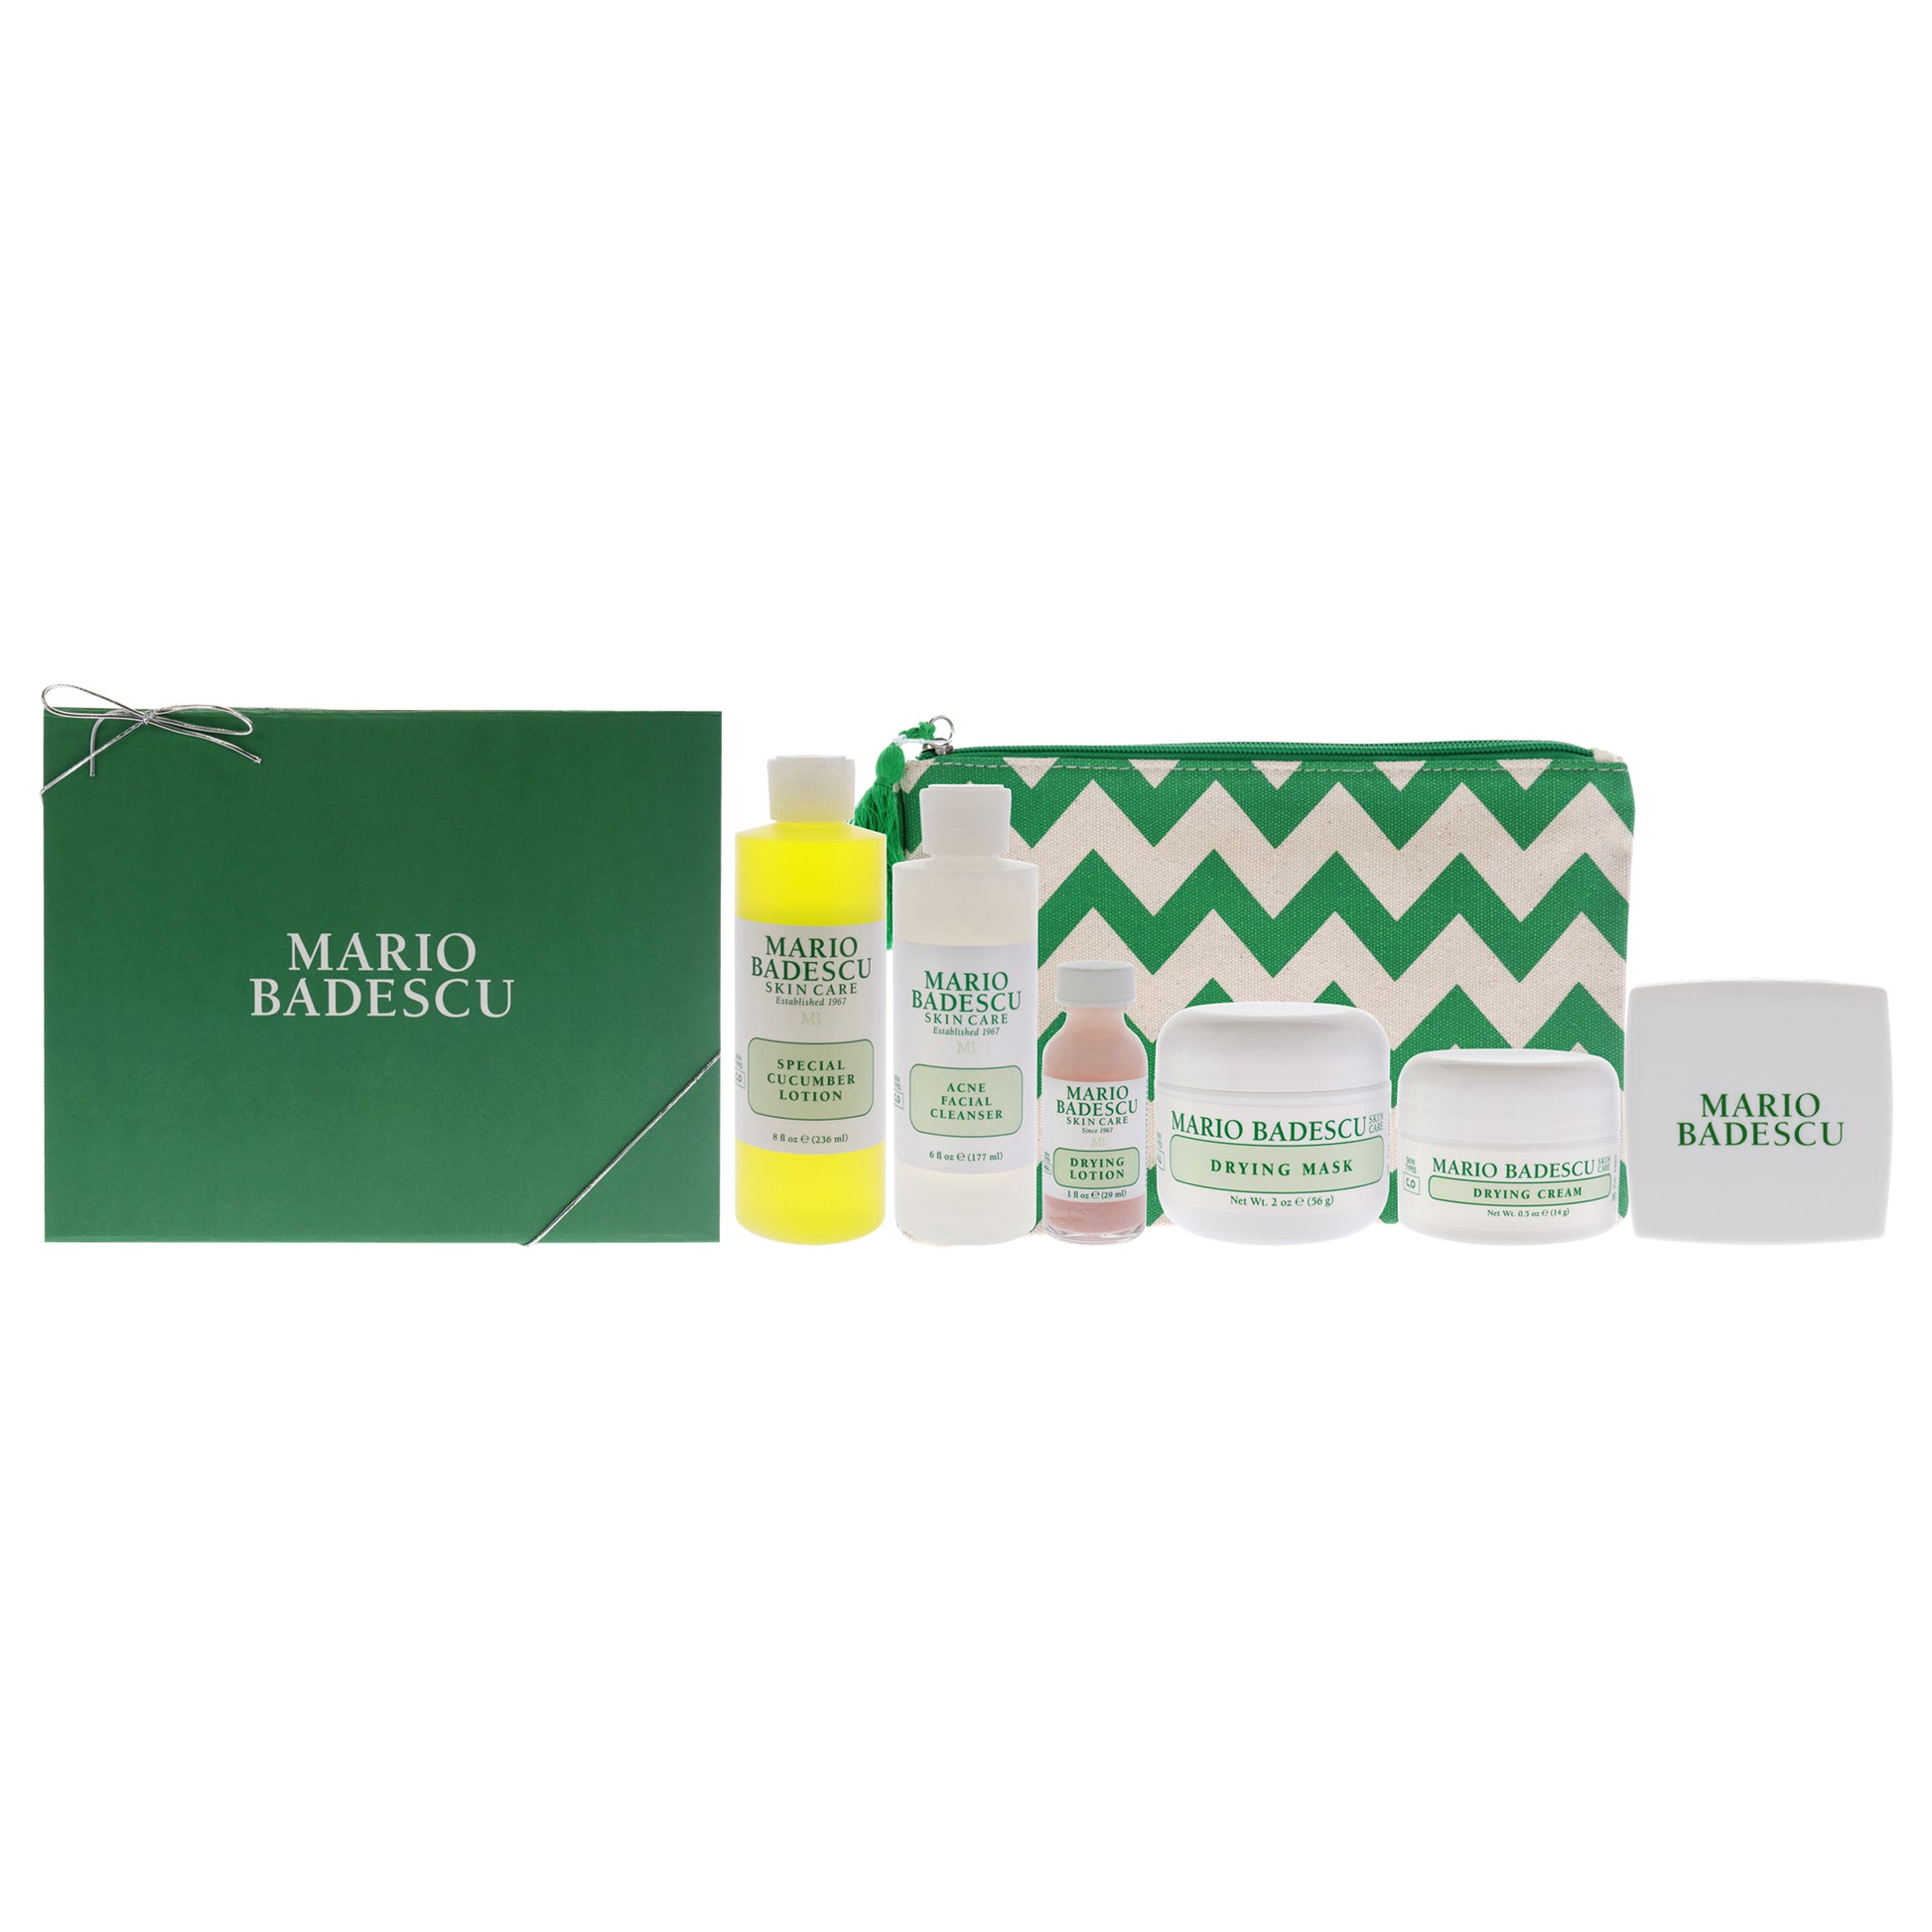 Acne Control Kit by Mario Badescu for Unisex - 5 Pc 6oz Acne Facial Cleanser, 8oz Special Cucumber Lotion, 2oz Drying Mask, 1oz Drying Lotion, 0.5oz Drying Cream